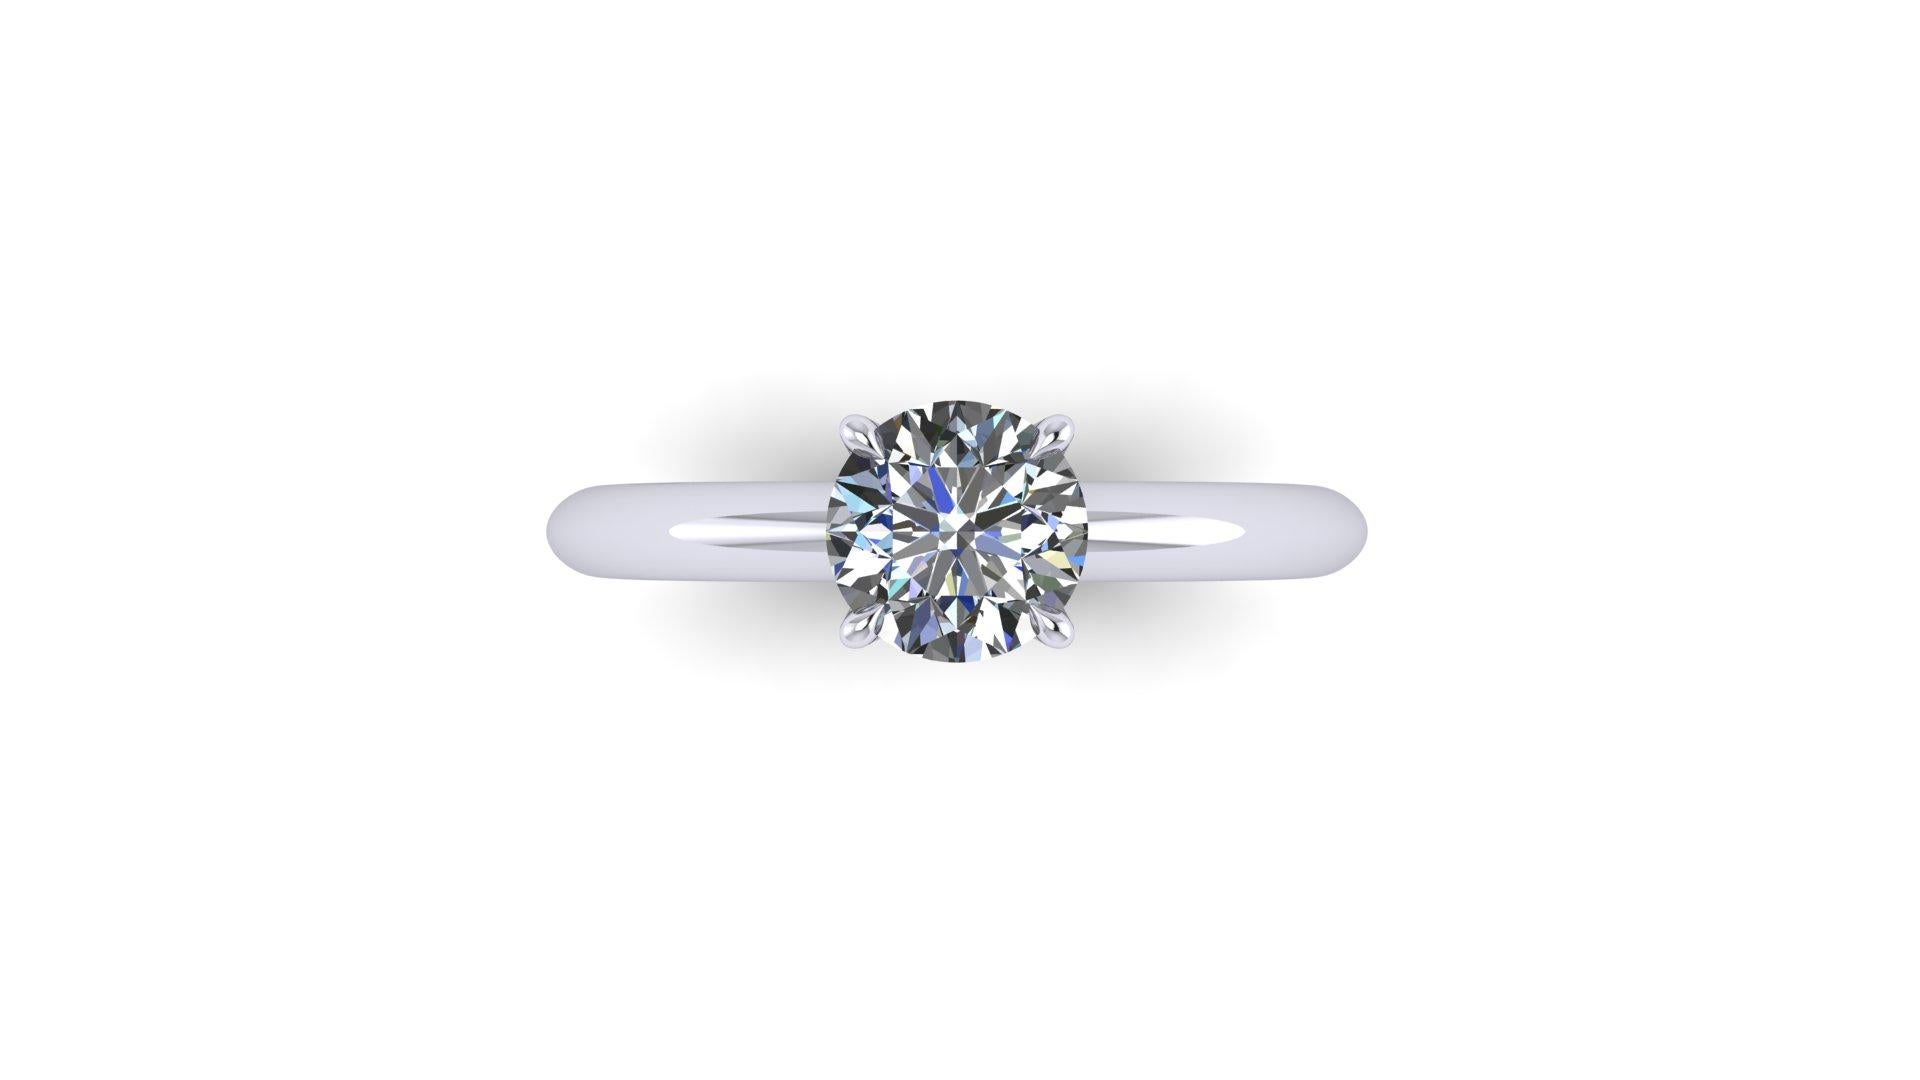 GIA Certified 1.06 Round diamond, G color, IF clarity, Internally Flawless with Triple Excellent Specs, in a Classic Platinum Solitaire engagement ring with four minimal claw prongs.
The ring size is a 6